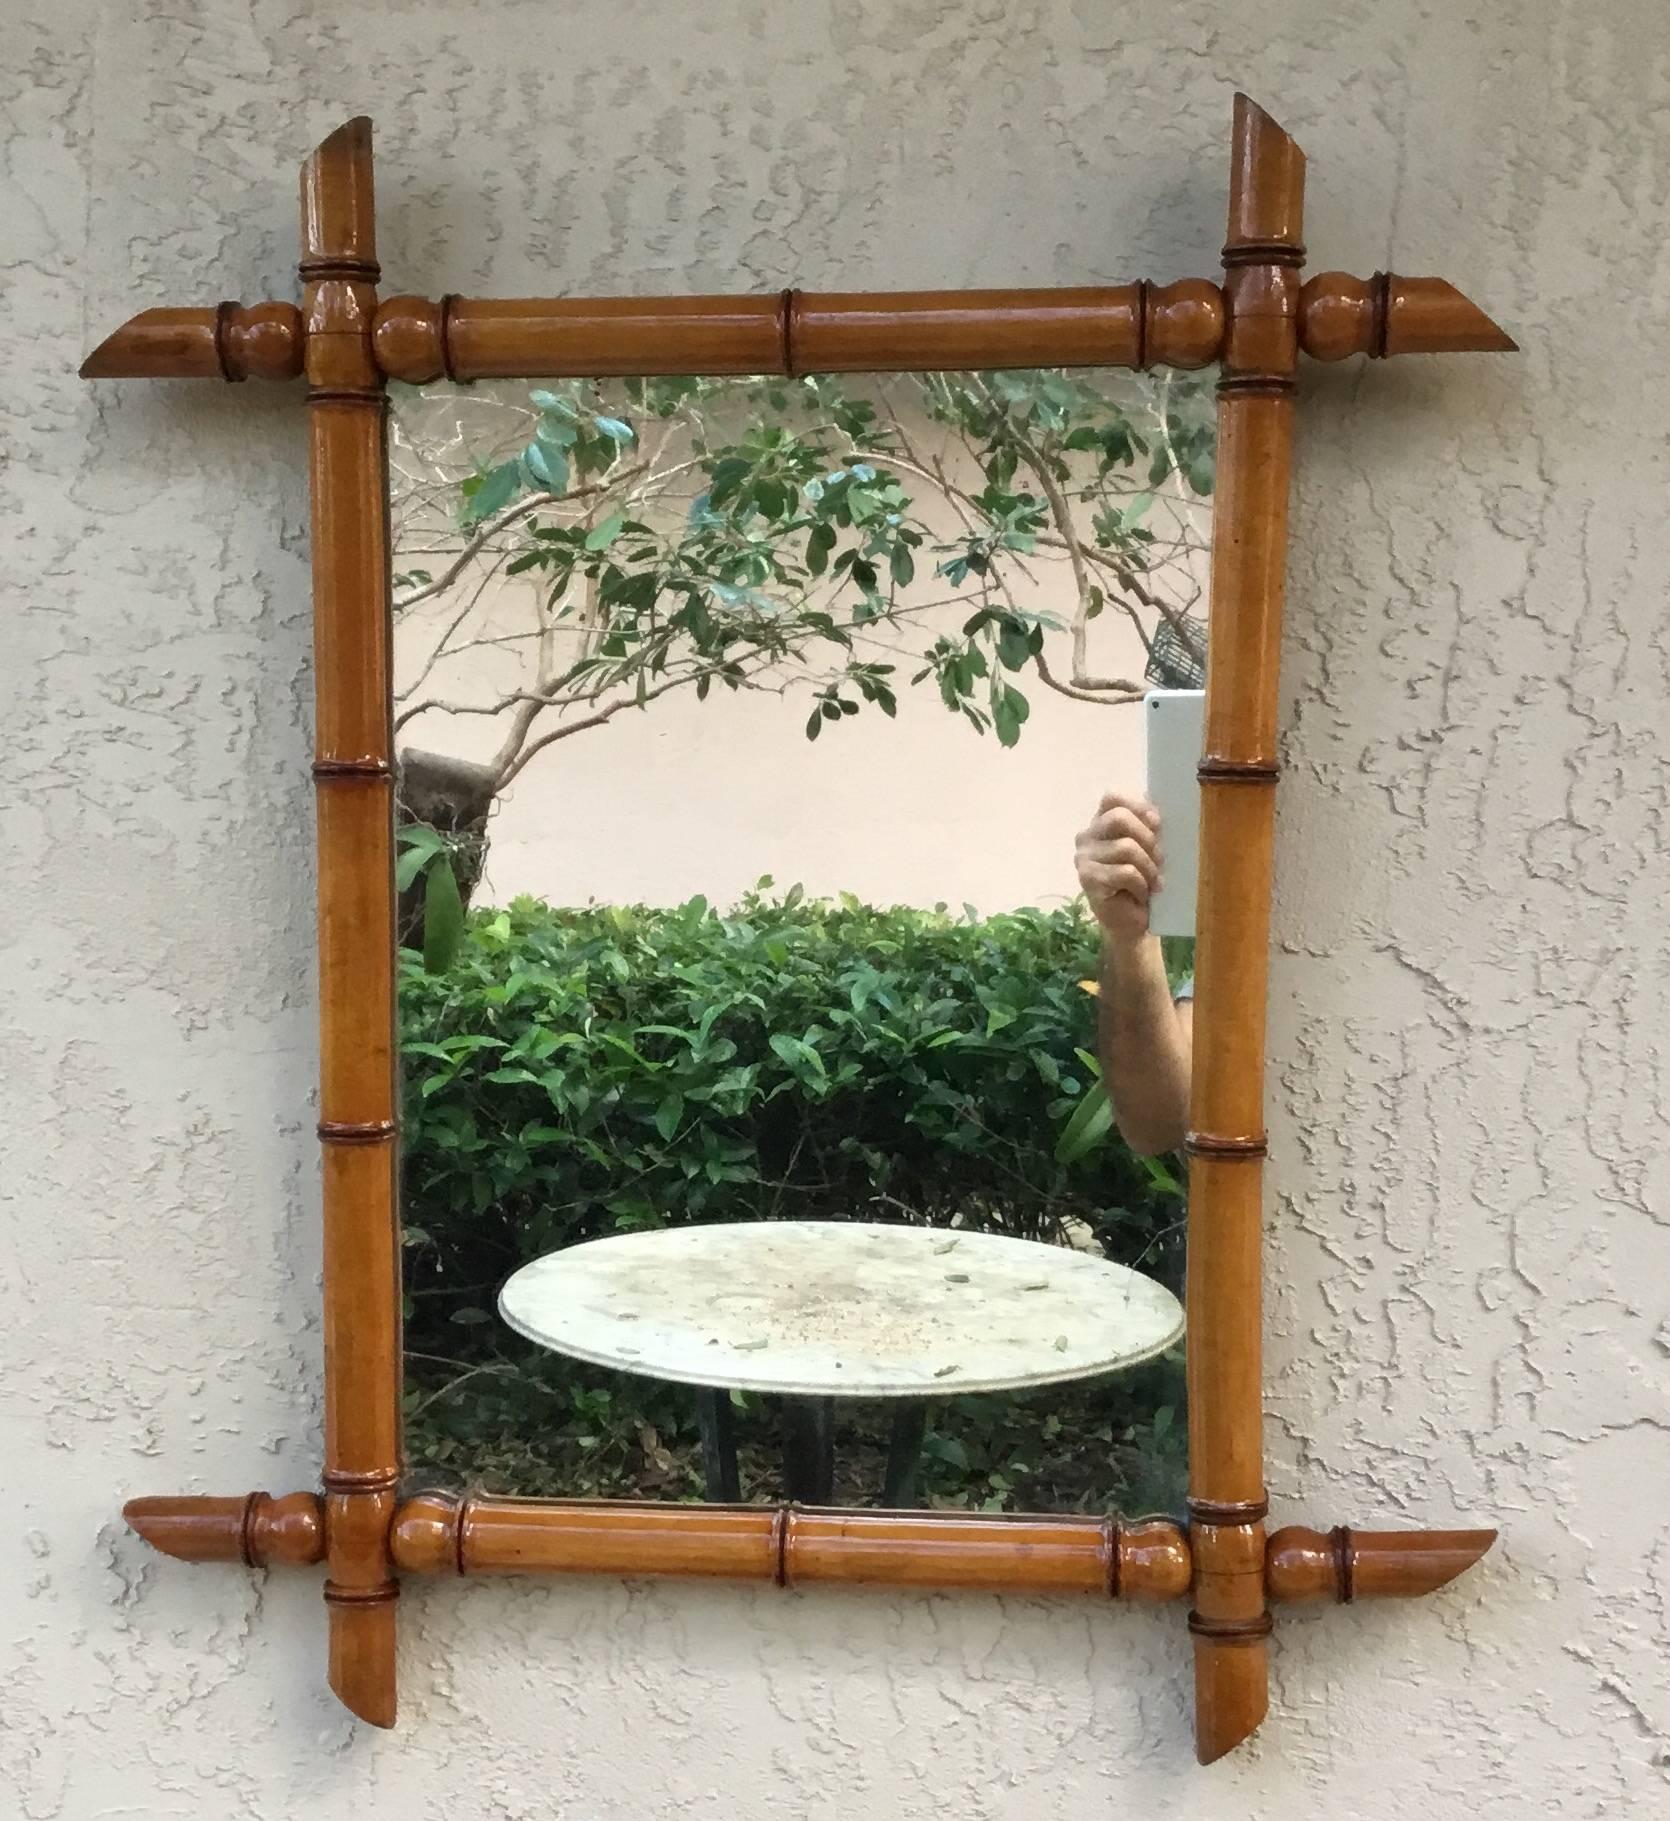 Elegant bamboo mirror that retains the beautiful old patination, with some age distress in the glass mirror, wood backing.